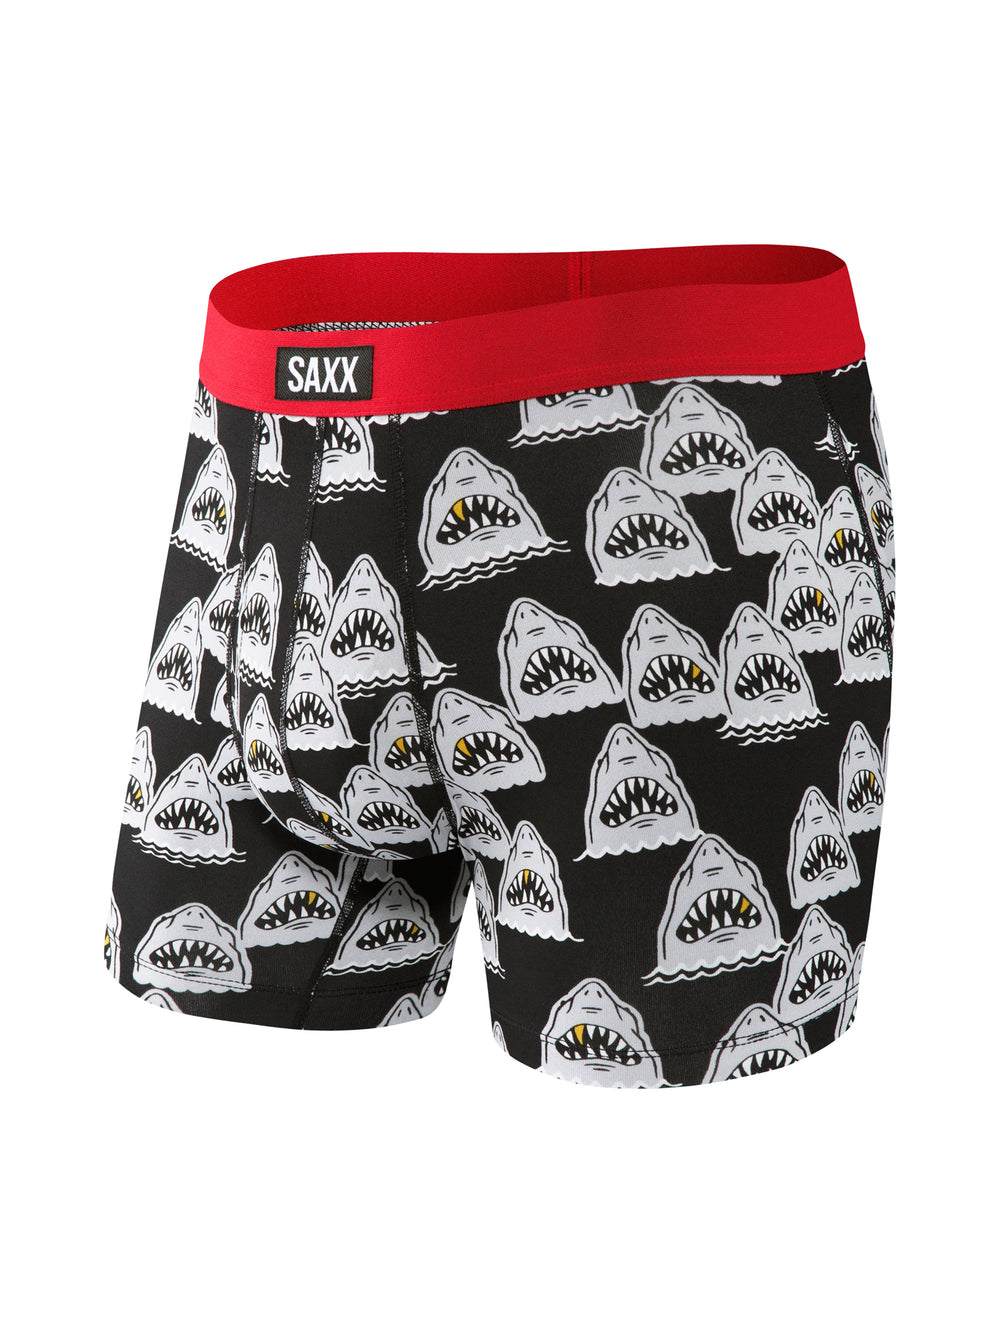 SAXX DAY TRIPPER BOXER BRIEFING - CLEARANCE